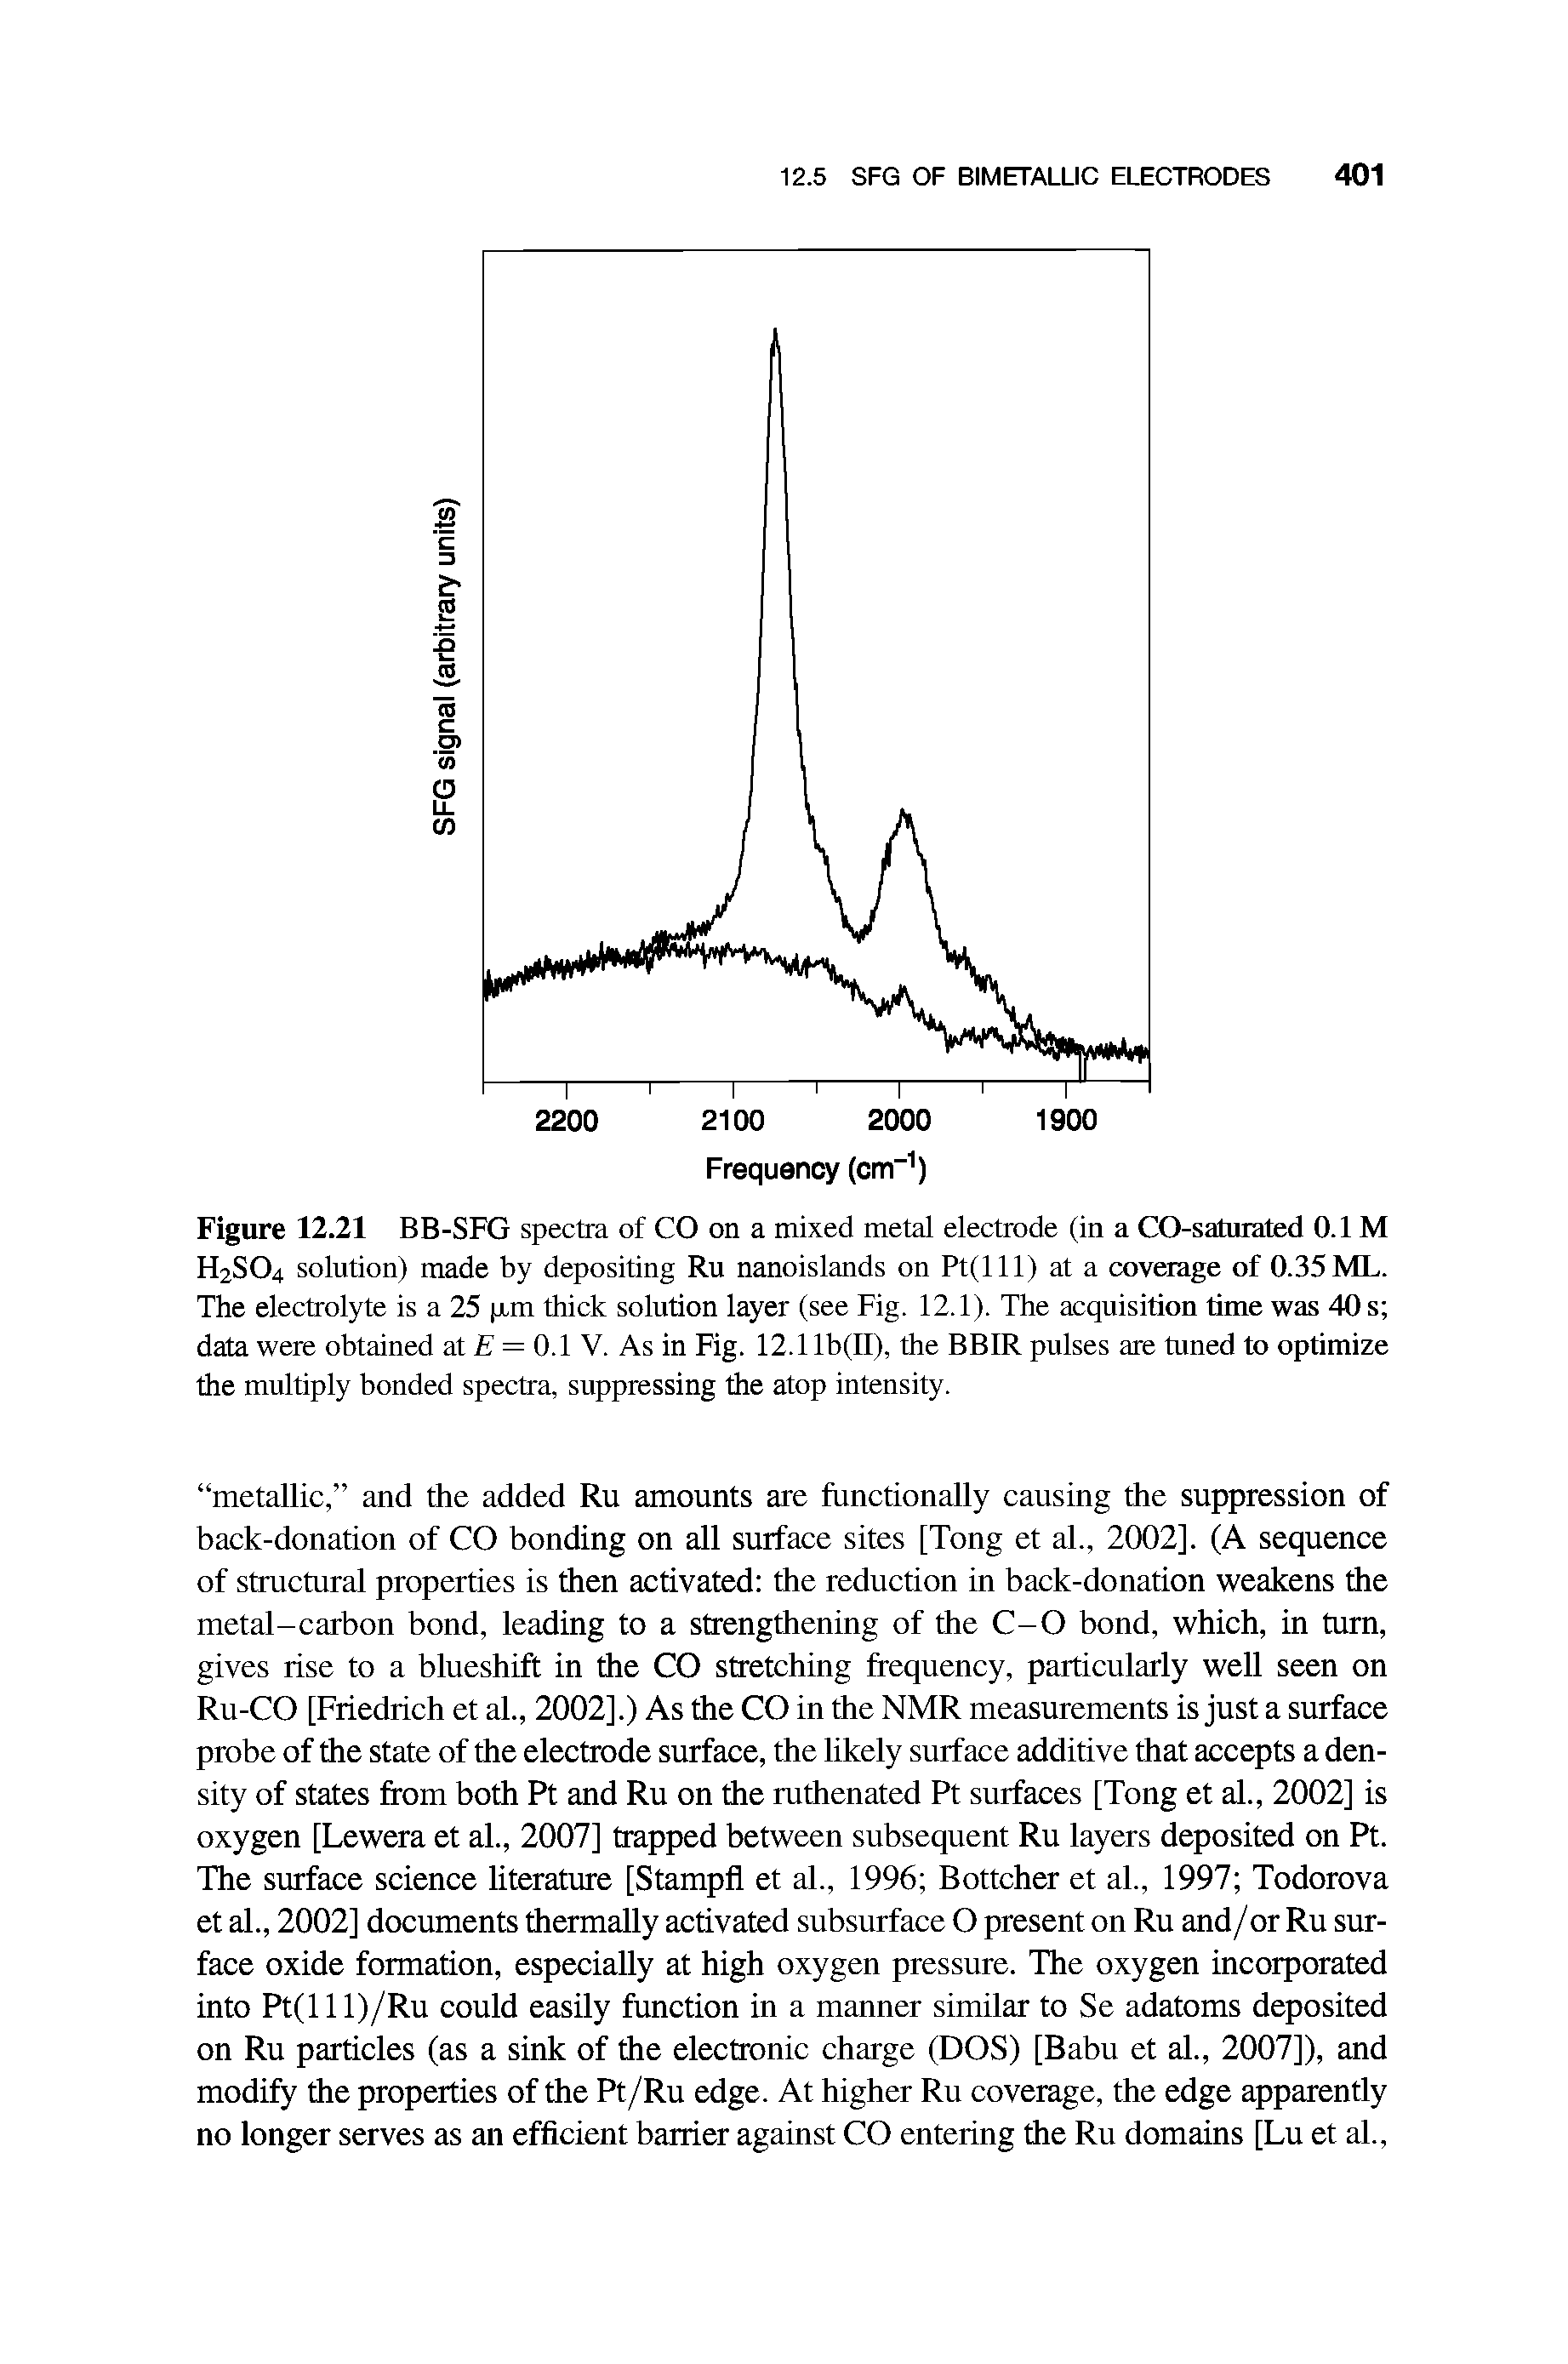 Figure 12.21 BB-SFG spectra of CO on a mixed metal electrode (in a CO-saturated 0.1 M H2SO4 solution) made by depositing Ru nanoislands on Pt(lll) at a coverage of 0.35 ML. The electrolyte is a 25 p-m thick solution layer (see Fig. 12.1). The acquisition time was 40 s data were obtained at = 0.1 V. As in Fig. 12.11b(II), the BBIR pulses are tuned to optimize the multiply bonded spectra, suppressing the atop intensity.